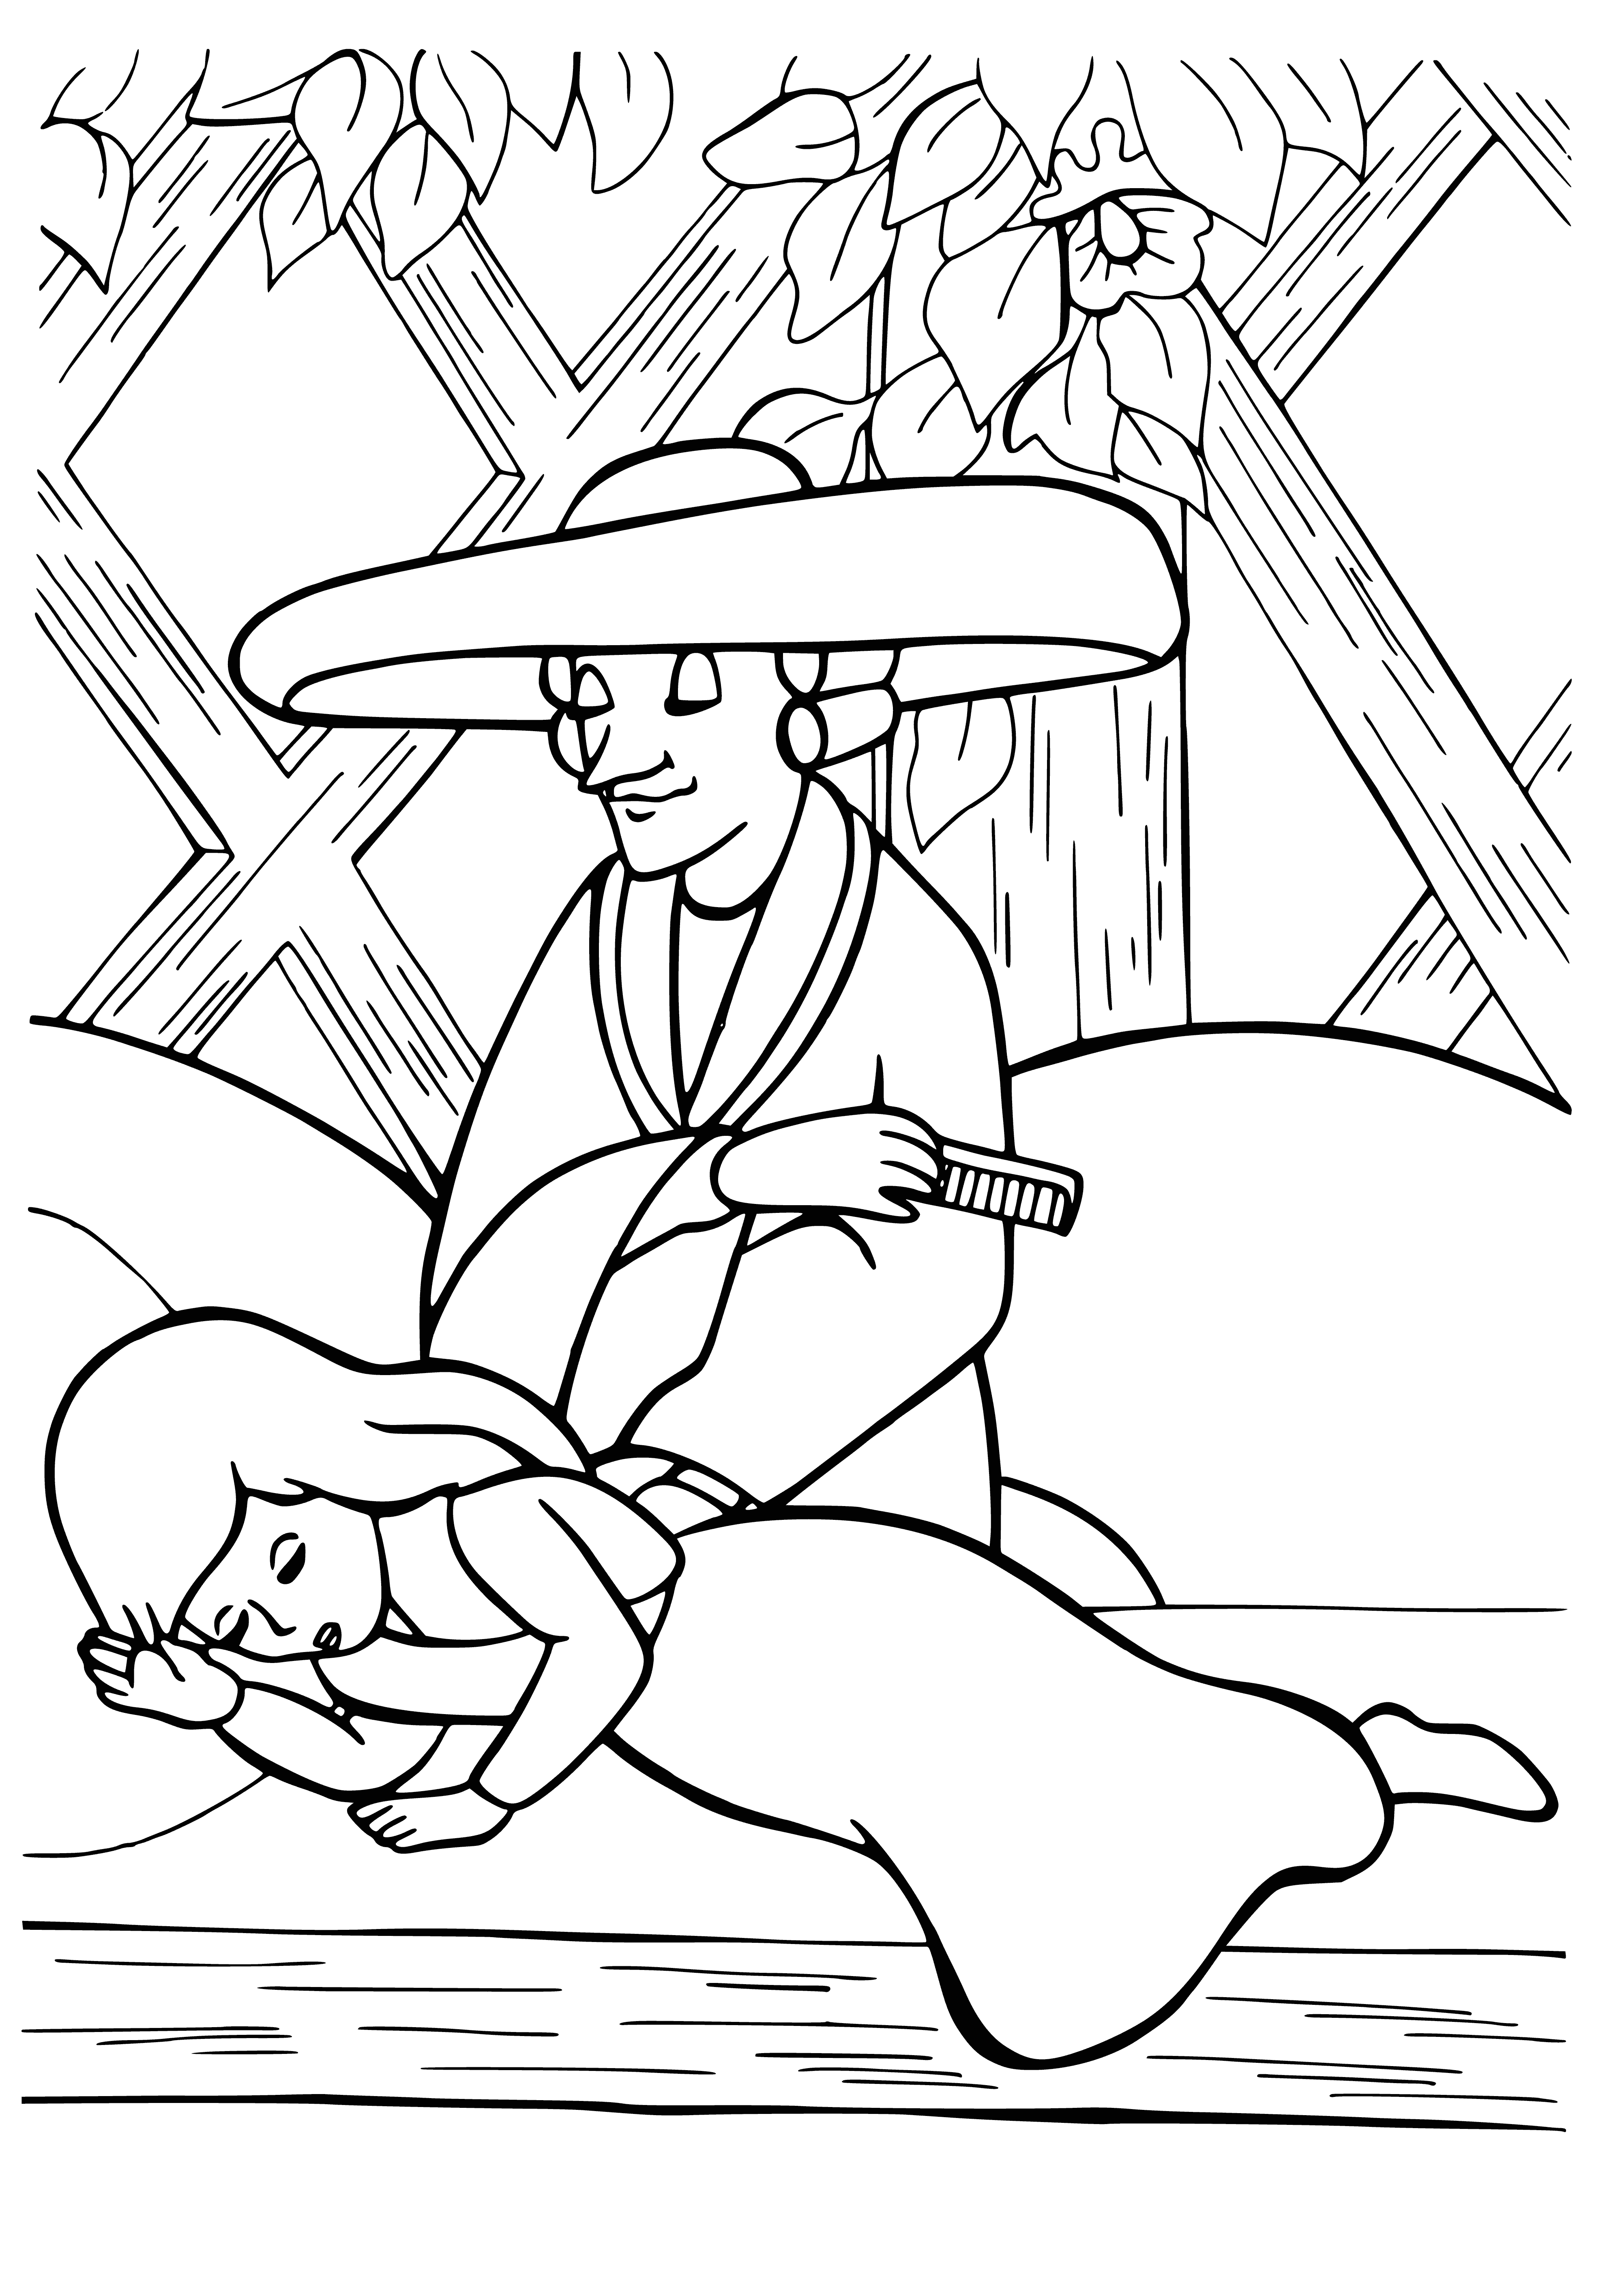 coloring page: Old lady happily waves wand, creating flurry of snowflakes; eyes twinkle, smile on face, enjoying herself immensely.